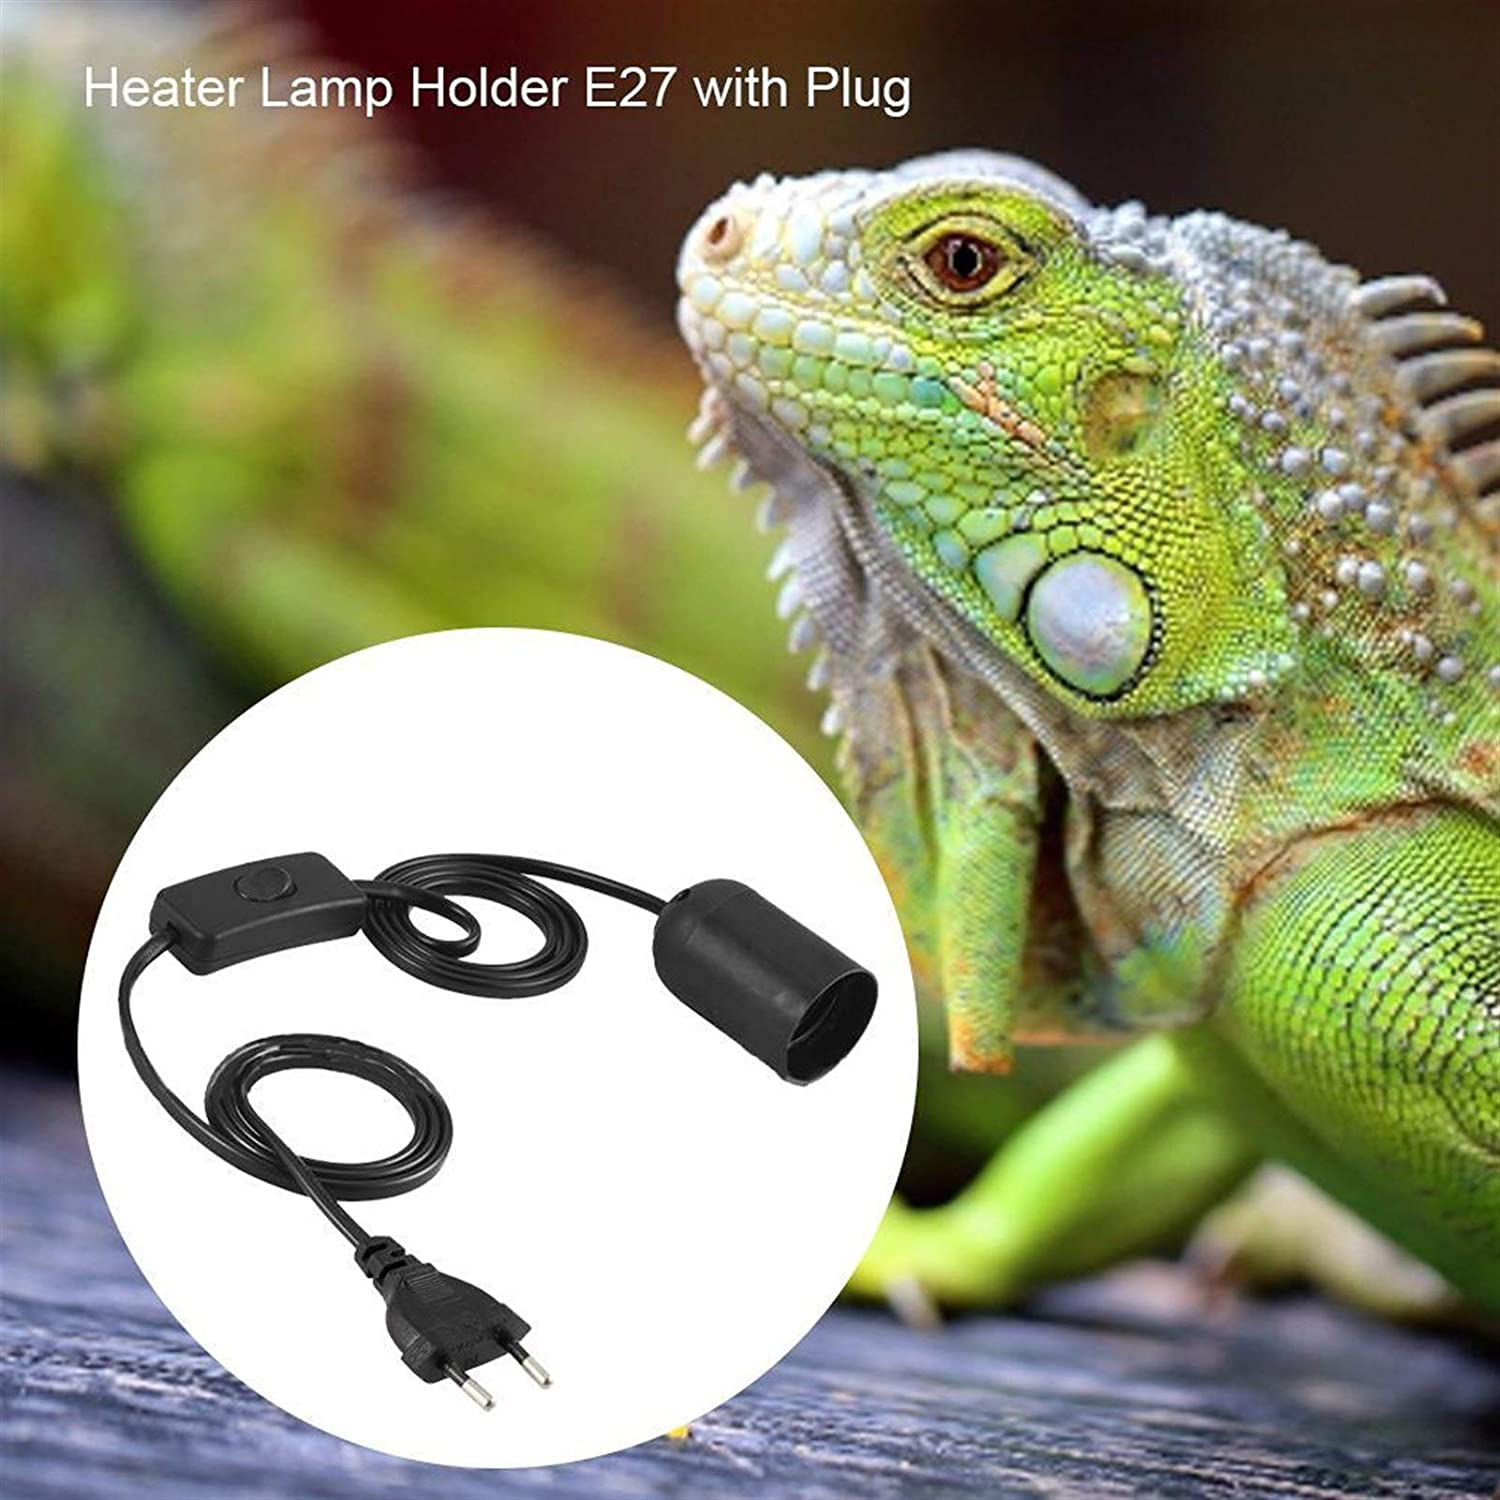 MING-BIN Pet Heating Heating Lamp Lamp Holder Switch Plug Reptile Chicken and Duck Heating Lamp Holder EU Animal Warm Keeping Lamp Holder Animals & Pet Supplies > Pet Supplies > Reptile & Amphibian Supplies > Reptile & Amphibian Habitat Heating & Lighting HXY2020   